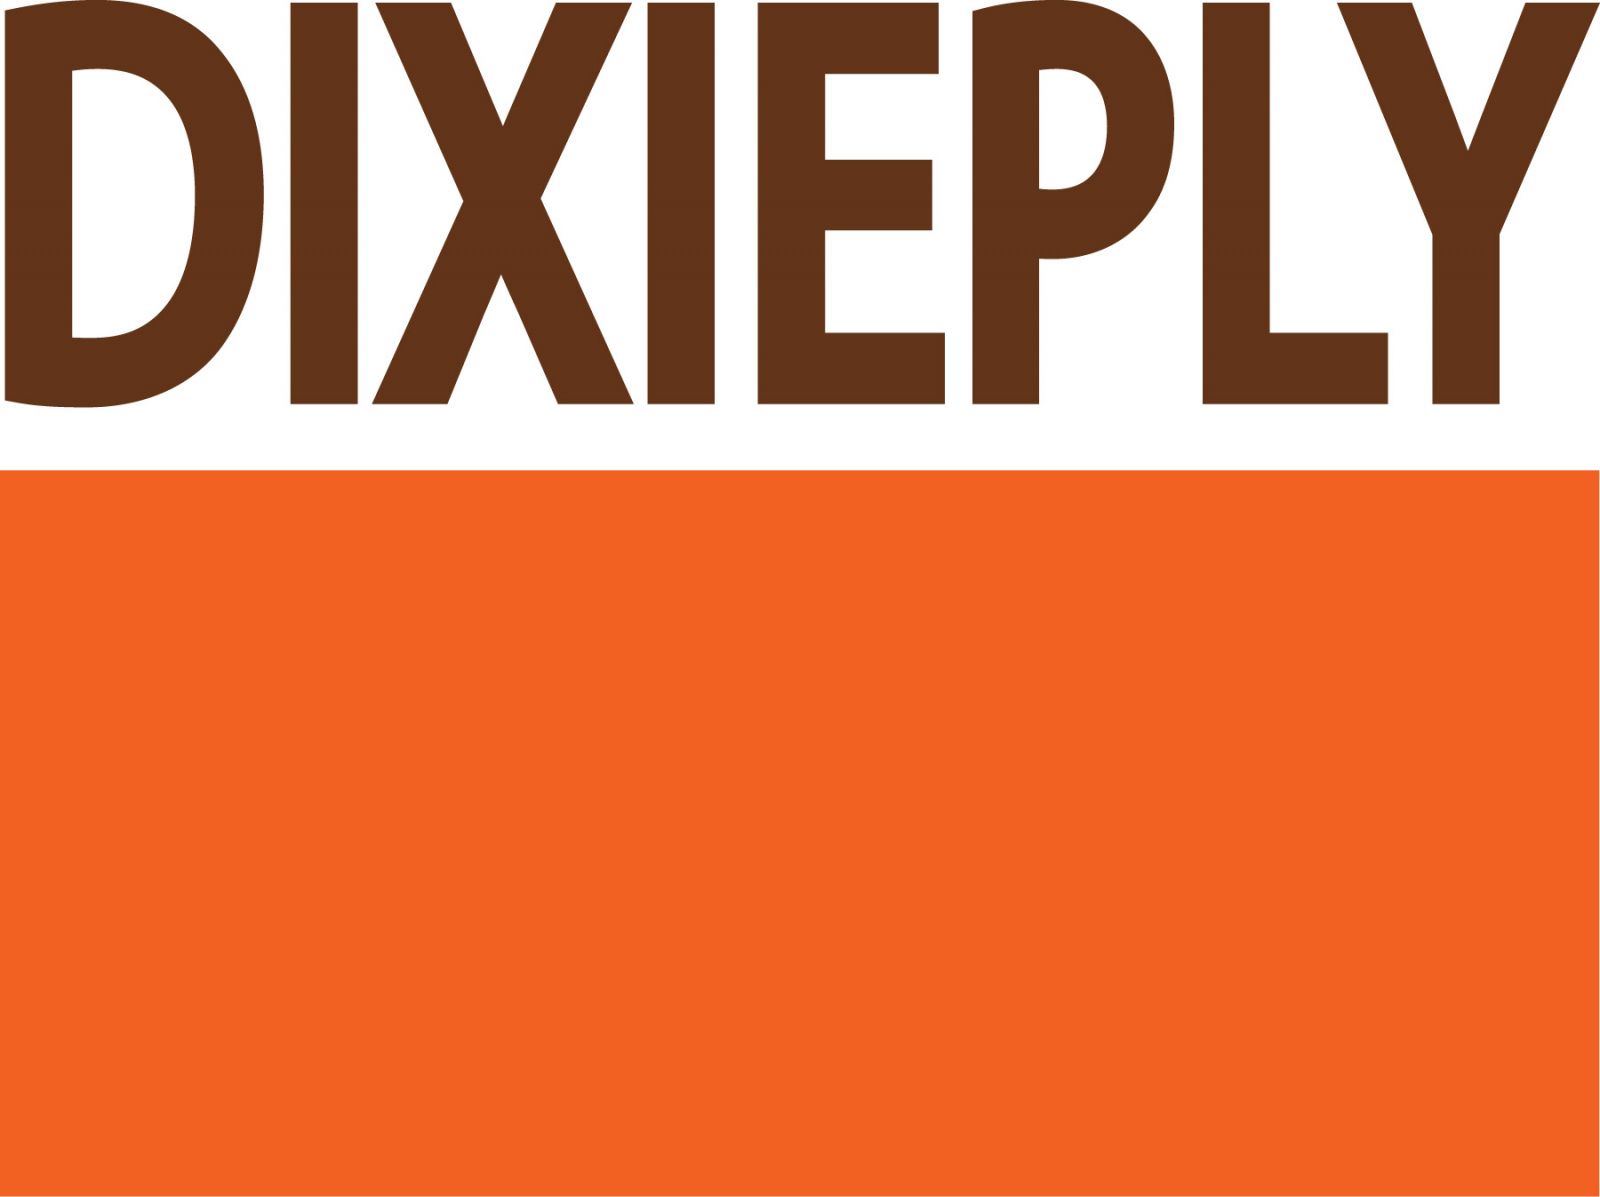 Dixieply Distributor - Best Source Supply Flooring and Hardware Distributor - Riviera Beach, FL